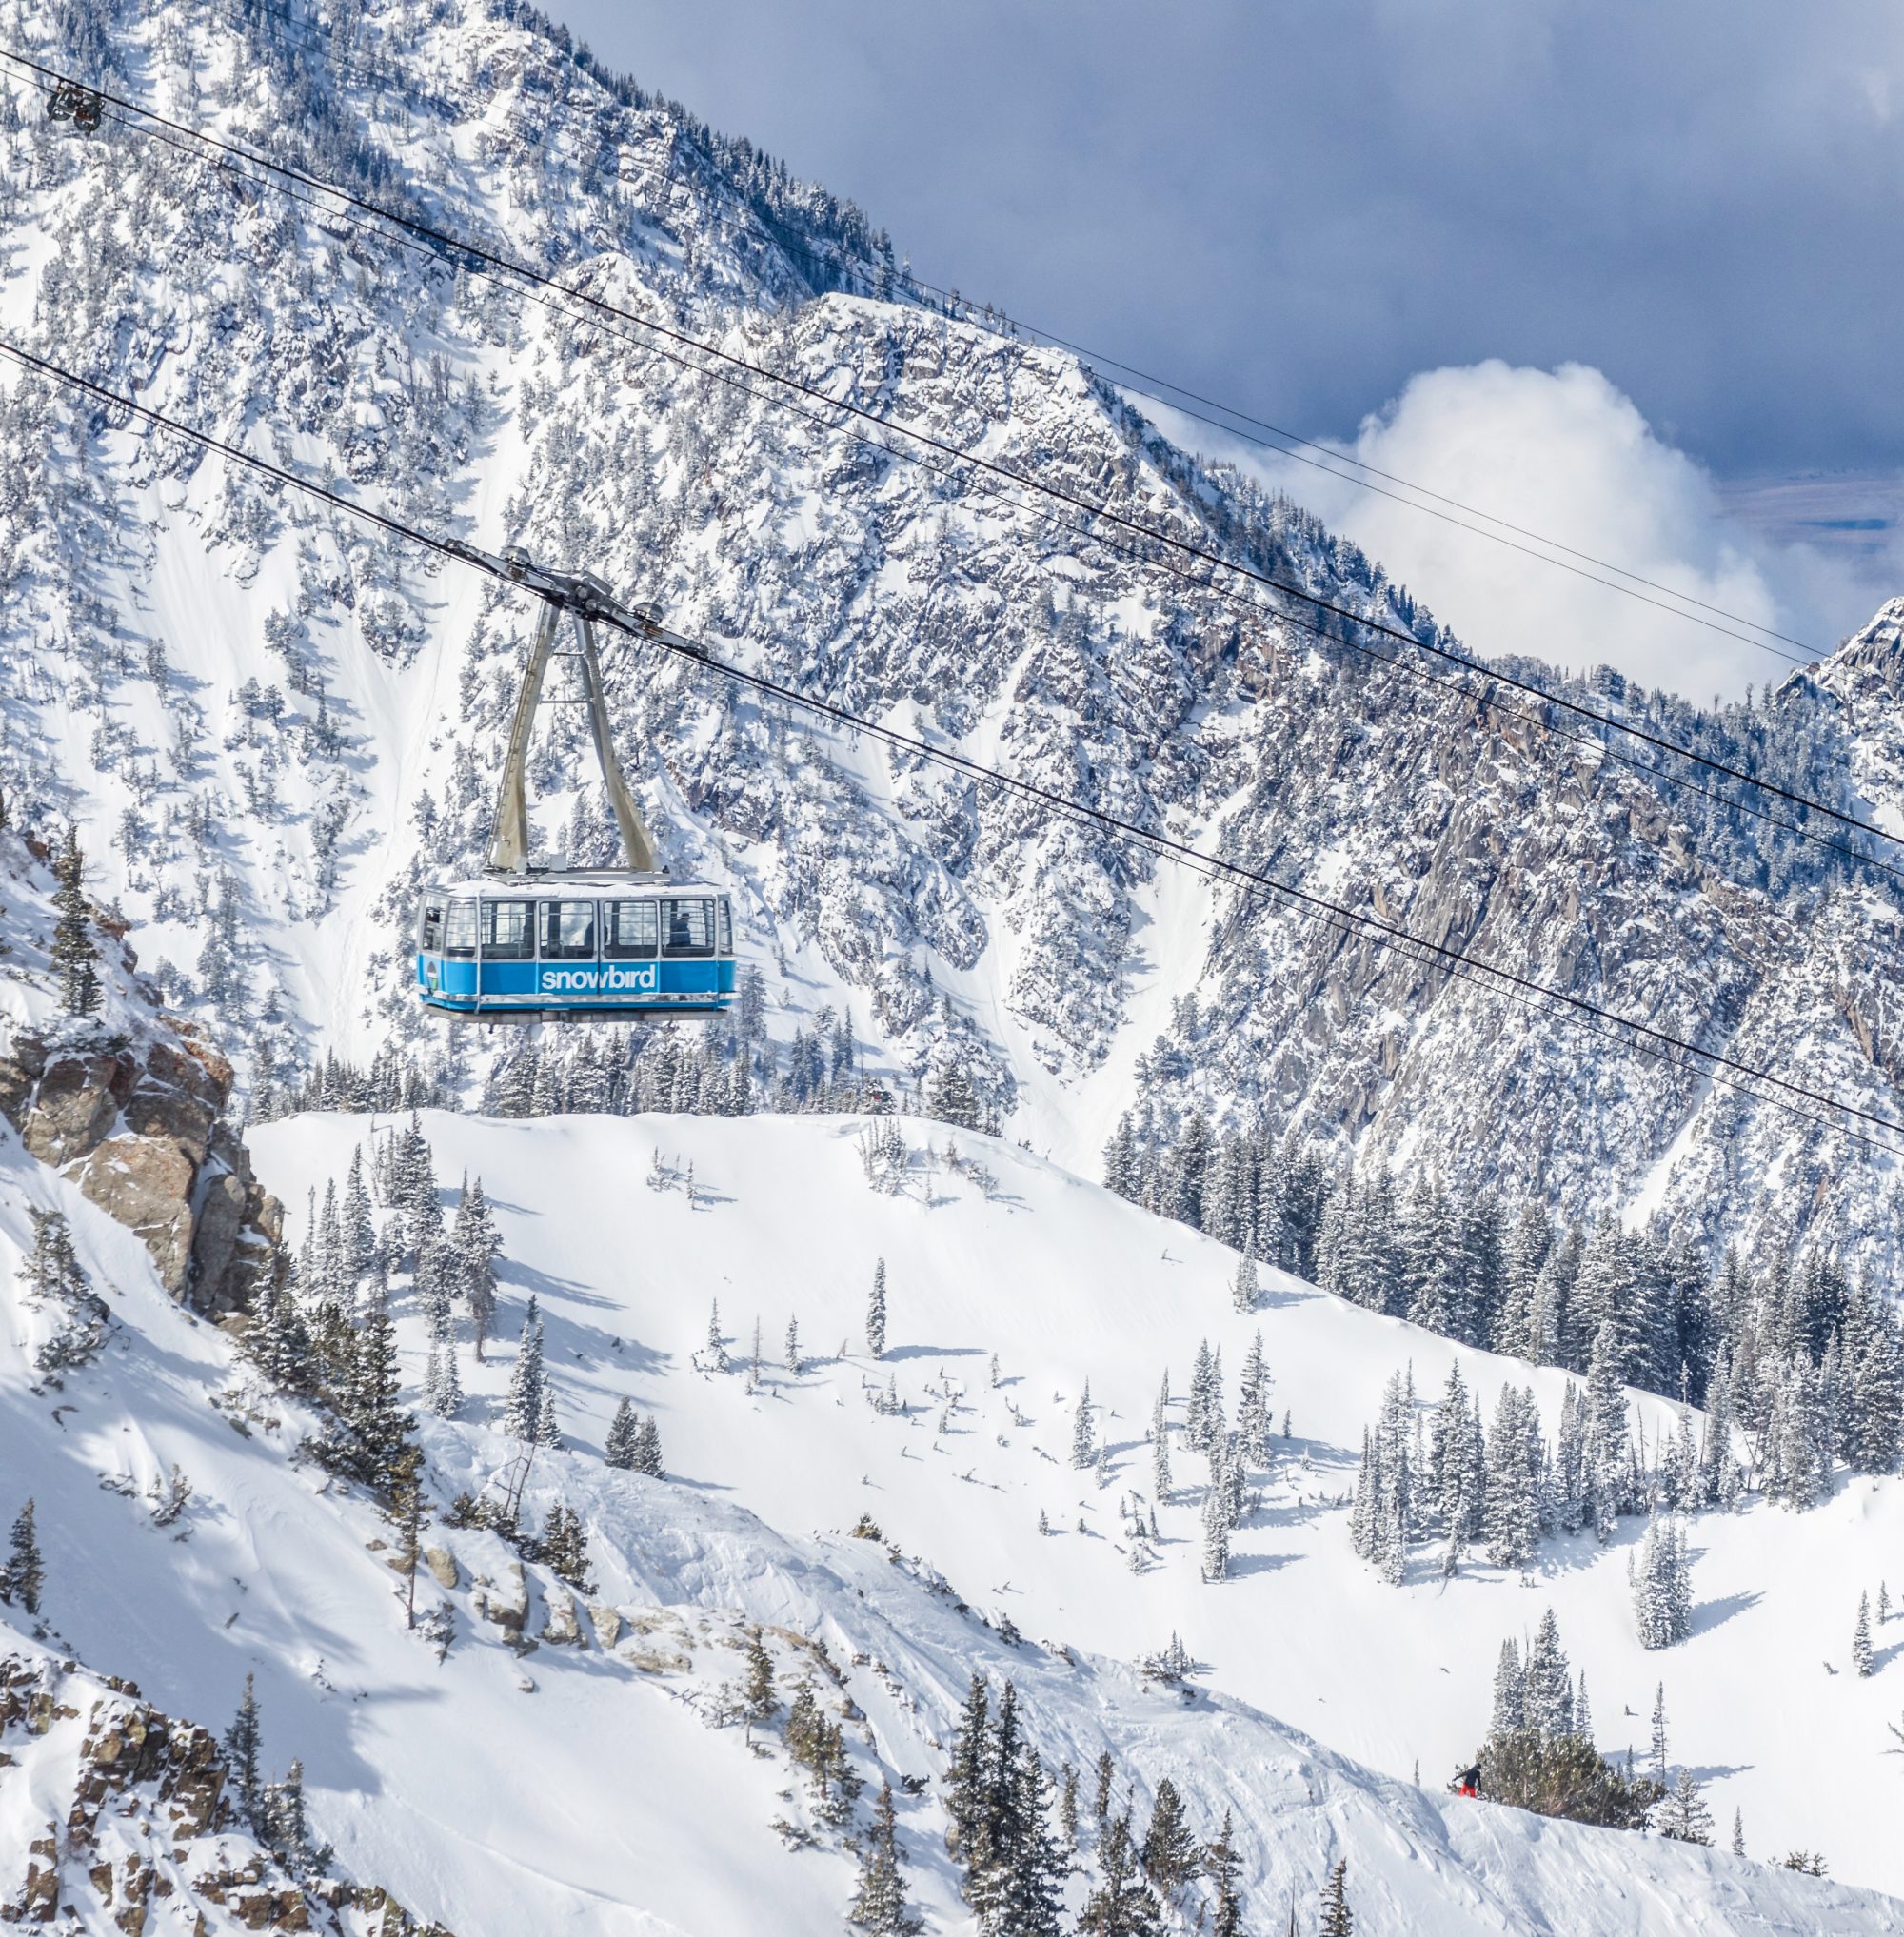 The Snowbird tram, in another of the amazing ski areas that the IKON pass will offer- Photo by Matt Crawley - Alterra Mountain Company.